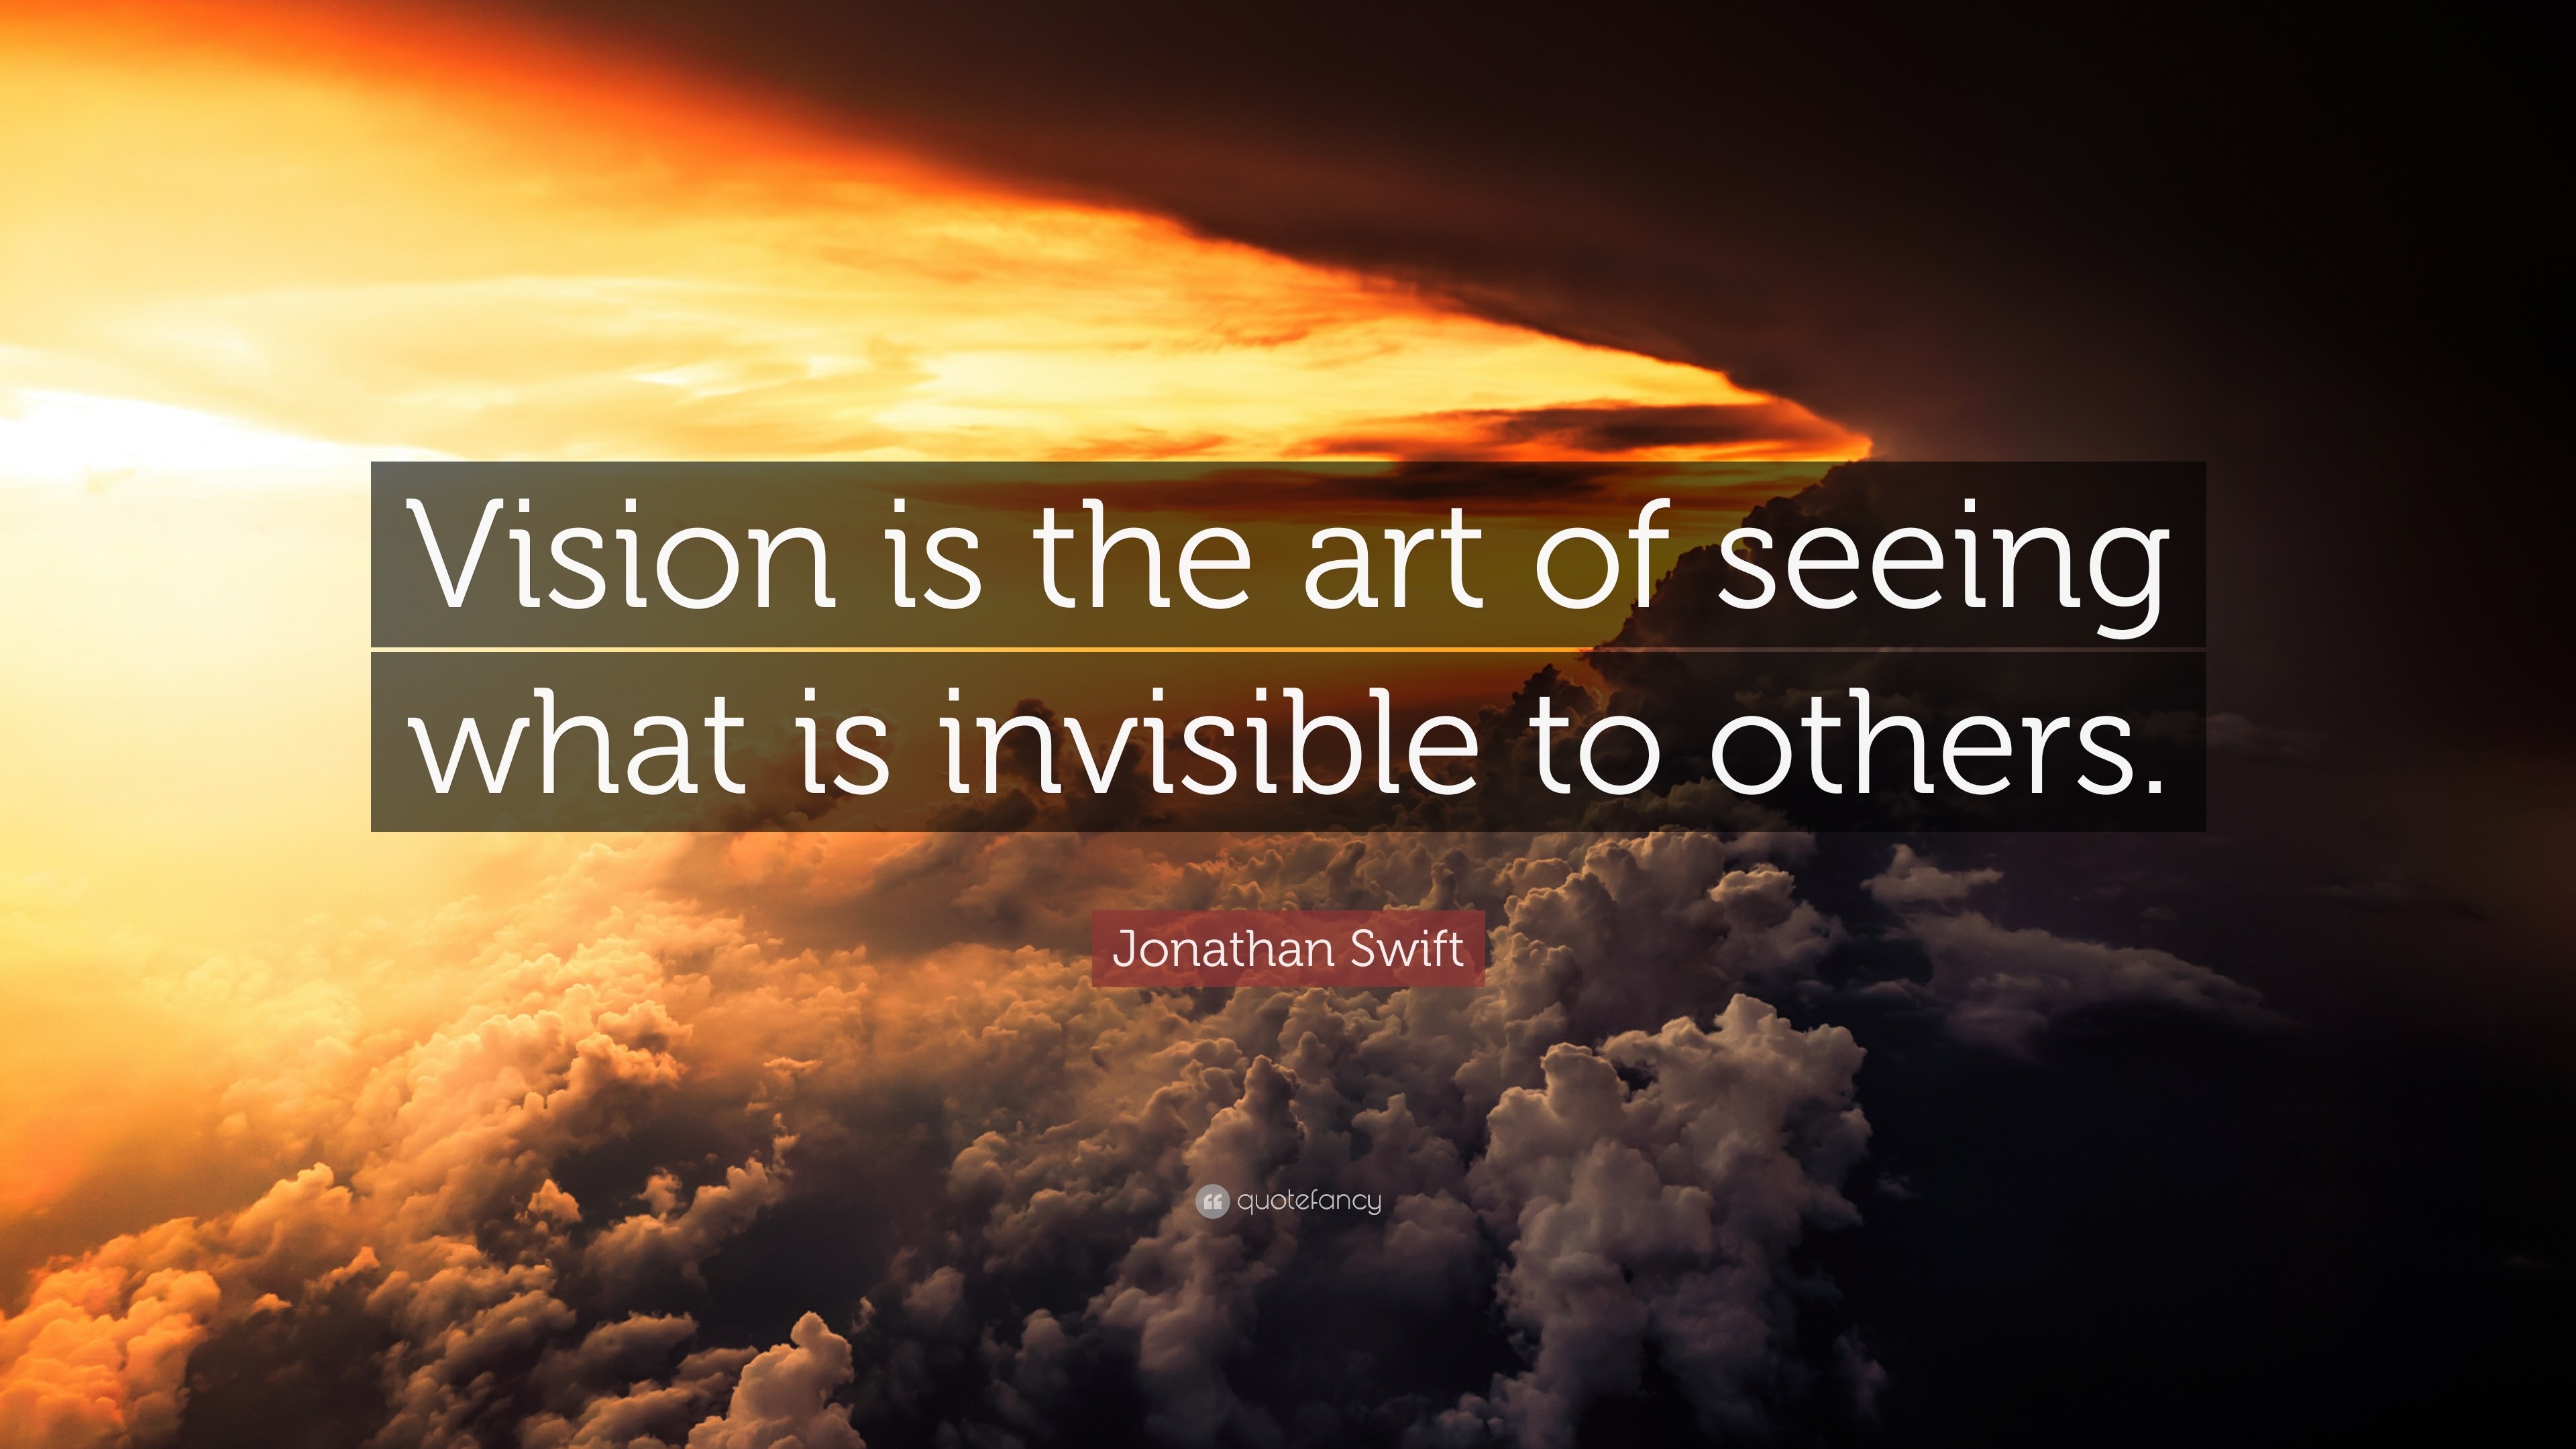 Jonathan Swift Quote: “Vision is the art of seeing what is invisible to